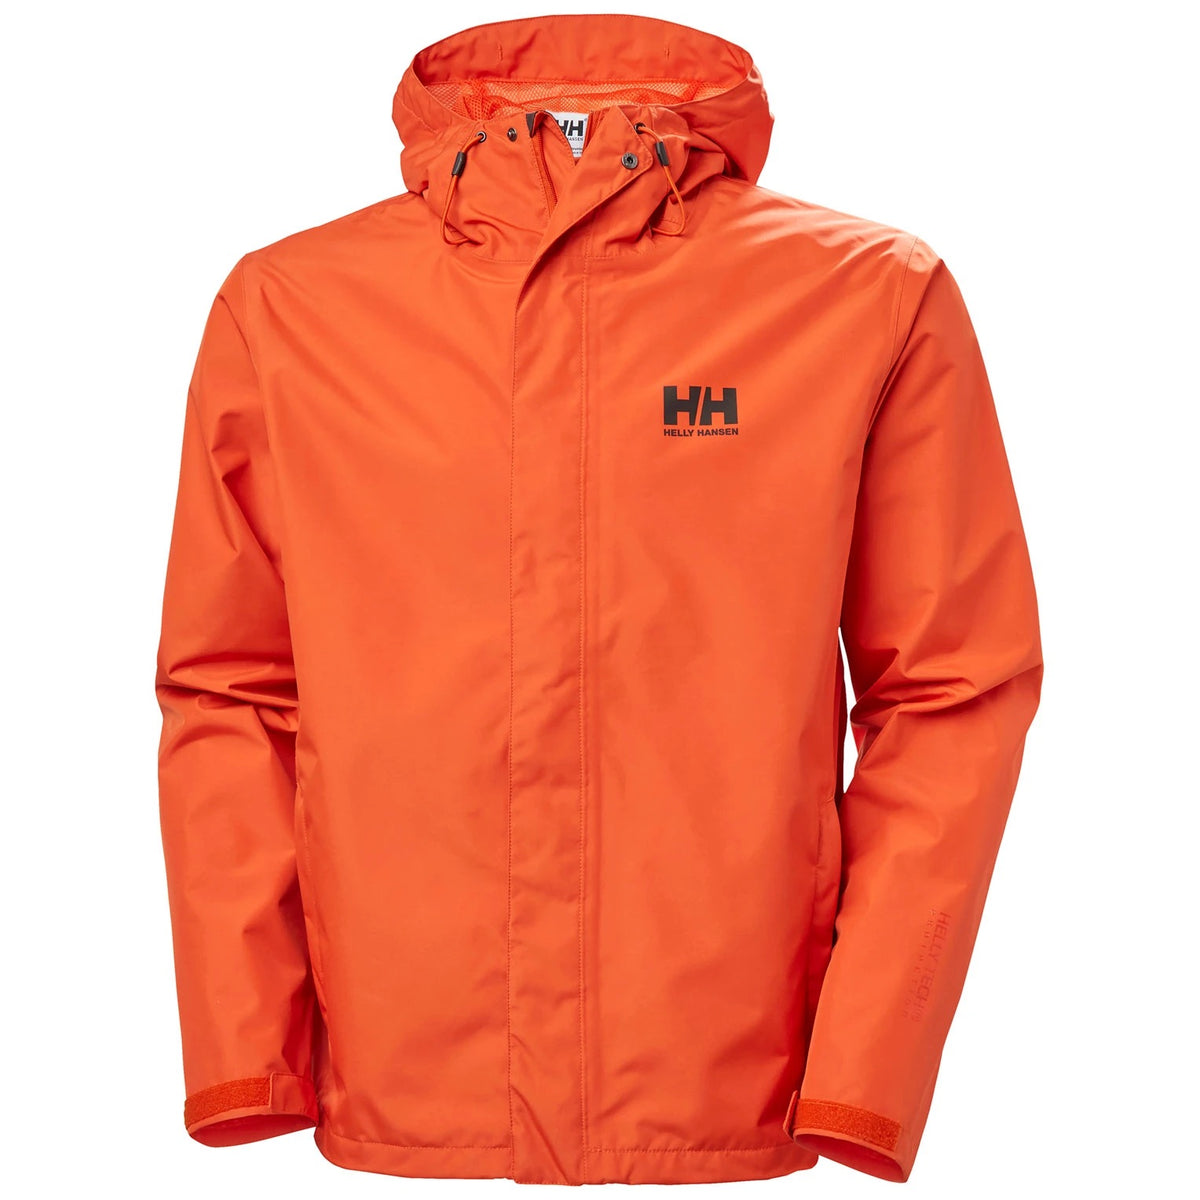 Hero image featuring the front of the Helly Hanson Seven J Rain Jacket in Patrol Orange